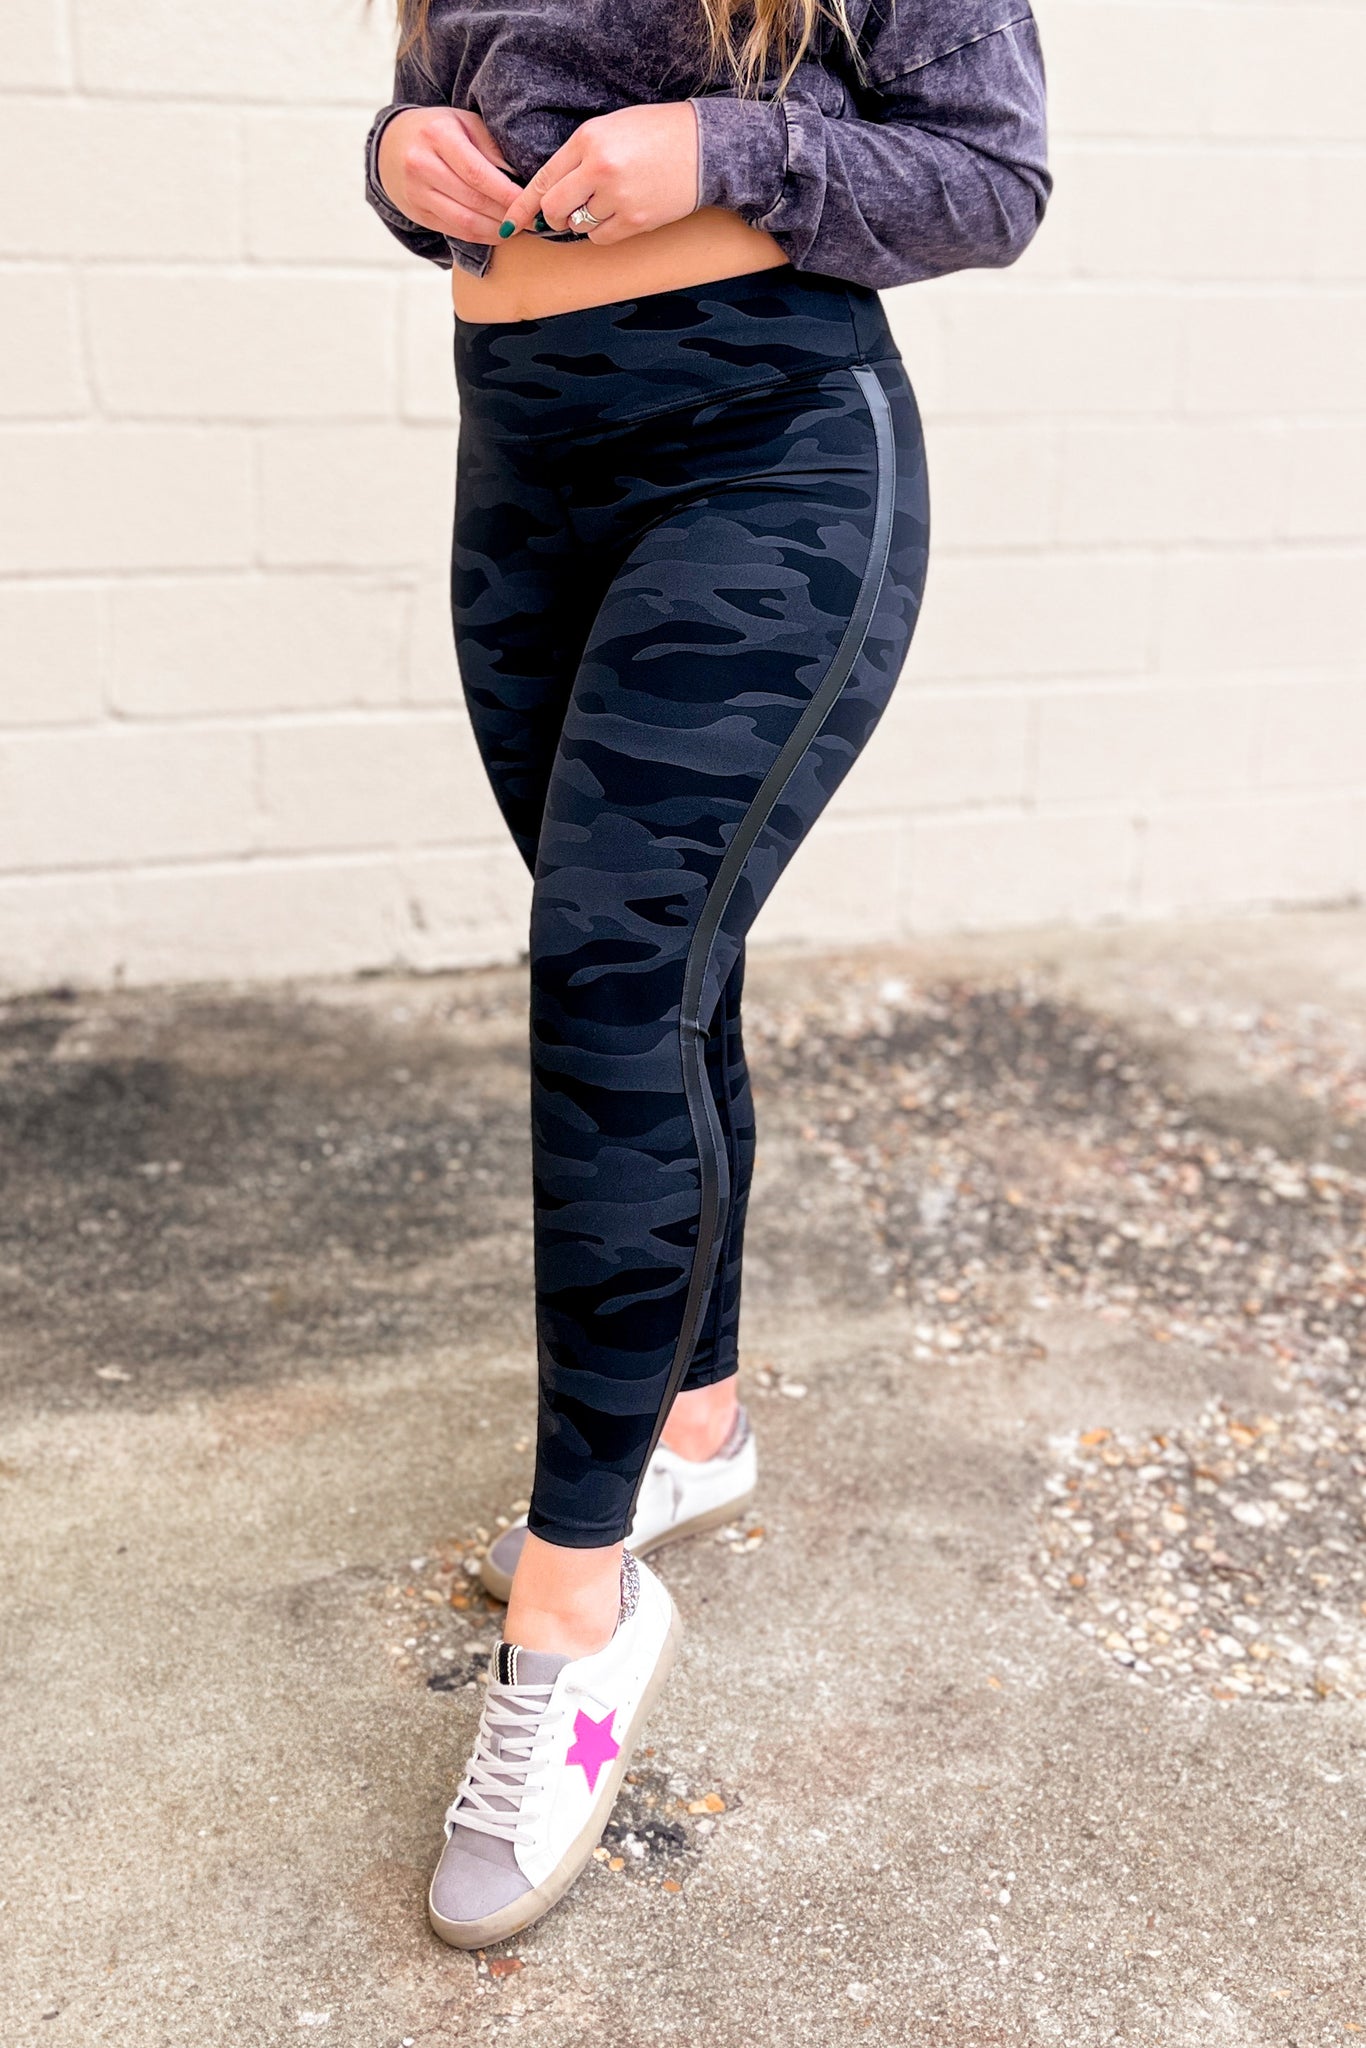 How To Style Camo Print Leggings | Connecticut Fashion and Lifestyle Blog |  Covering the Bases